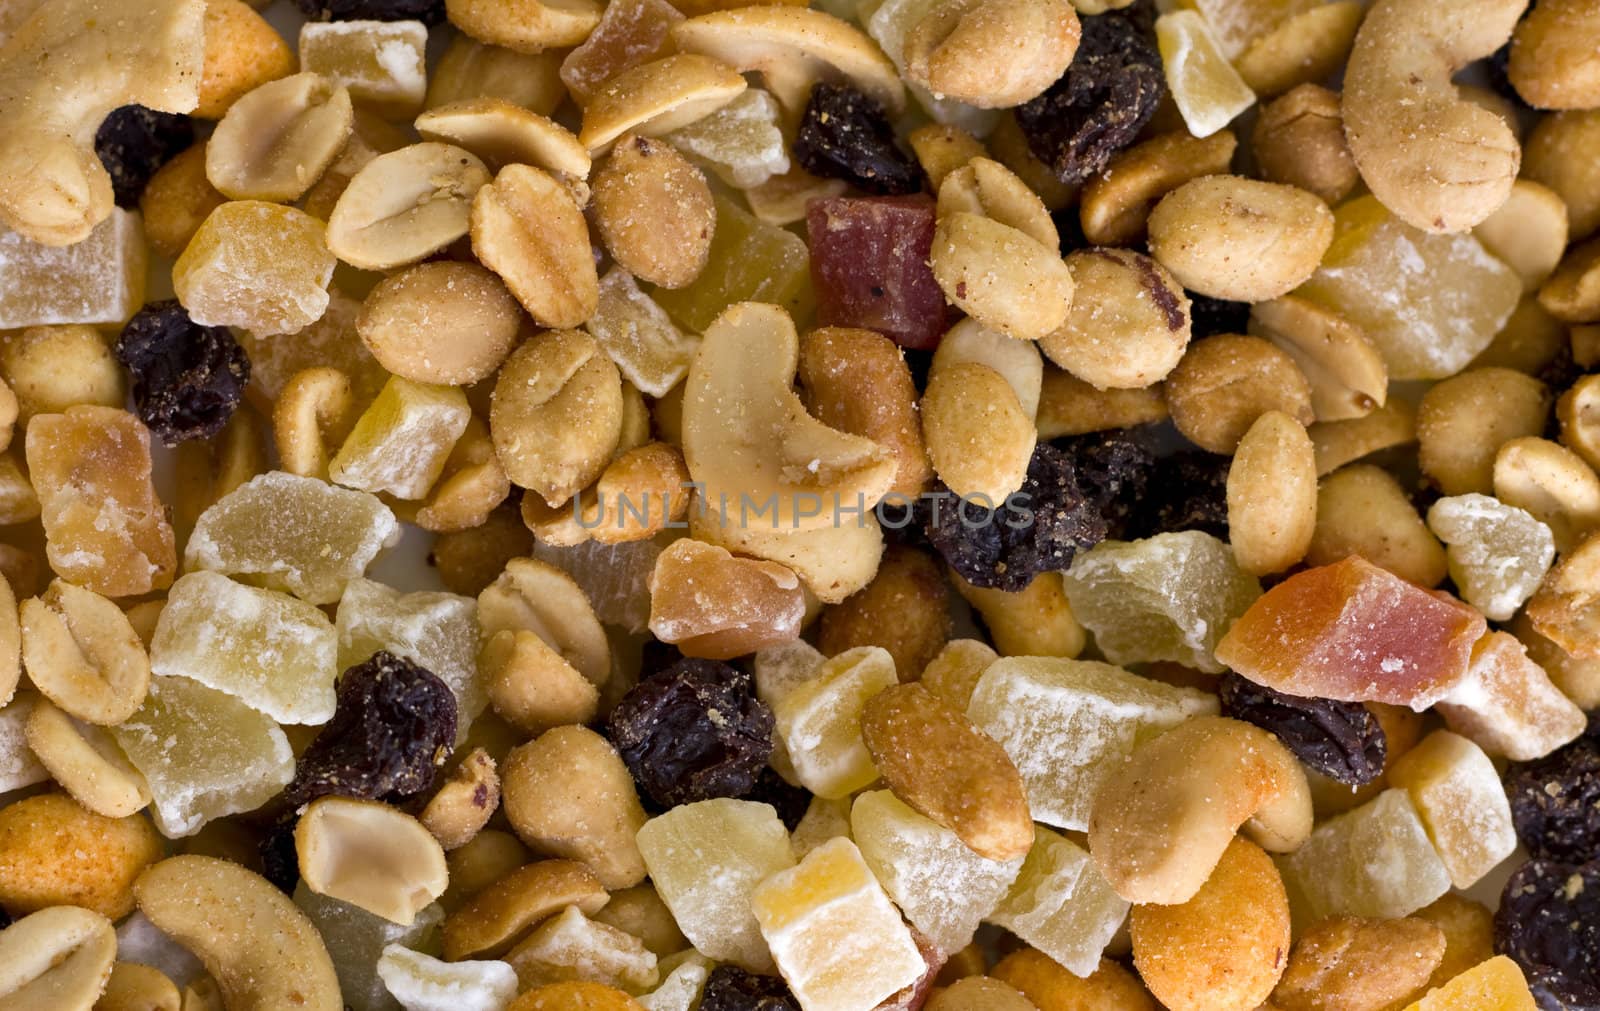 Delicious and healthy dried fruits and nuts.